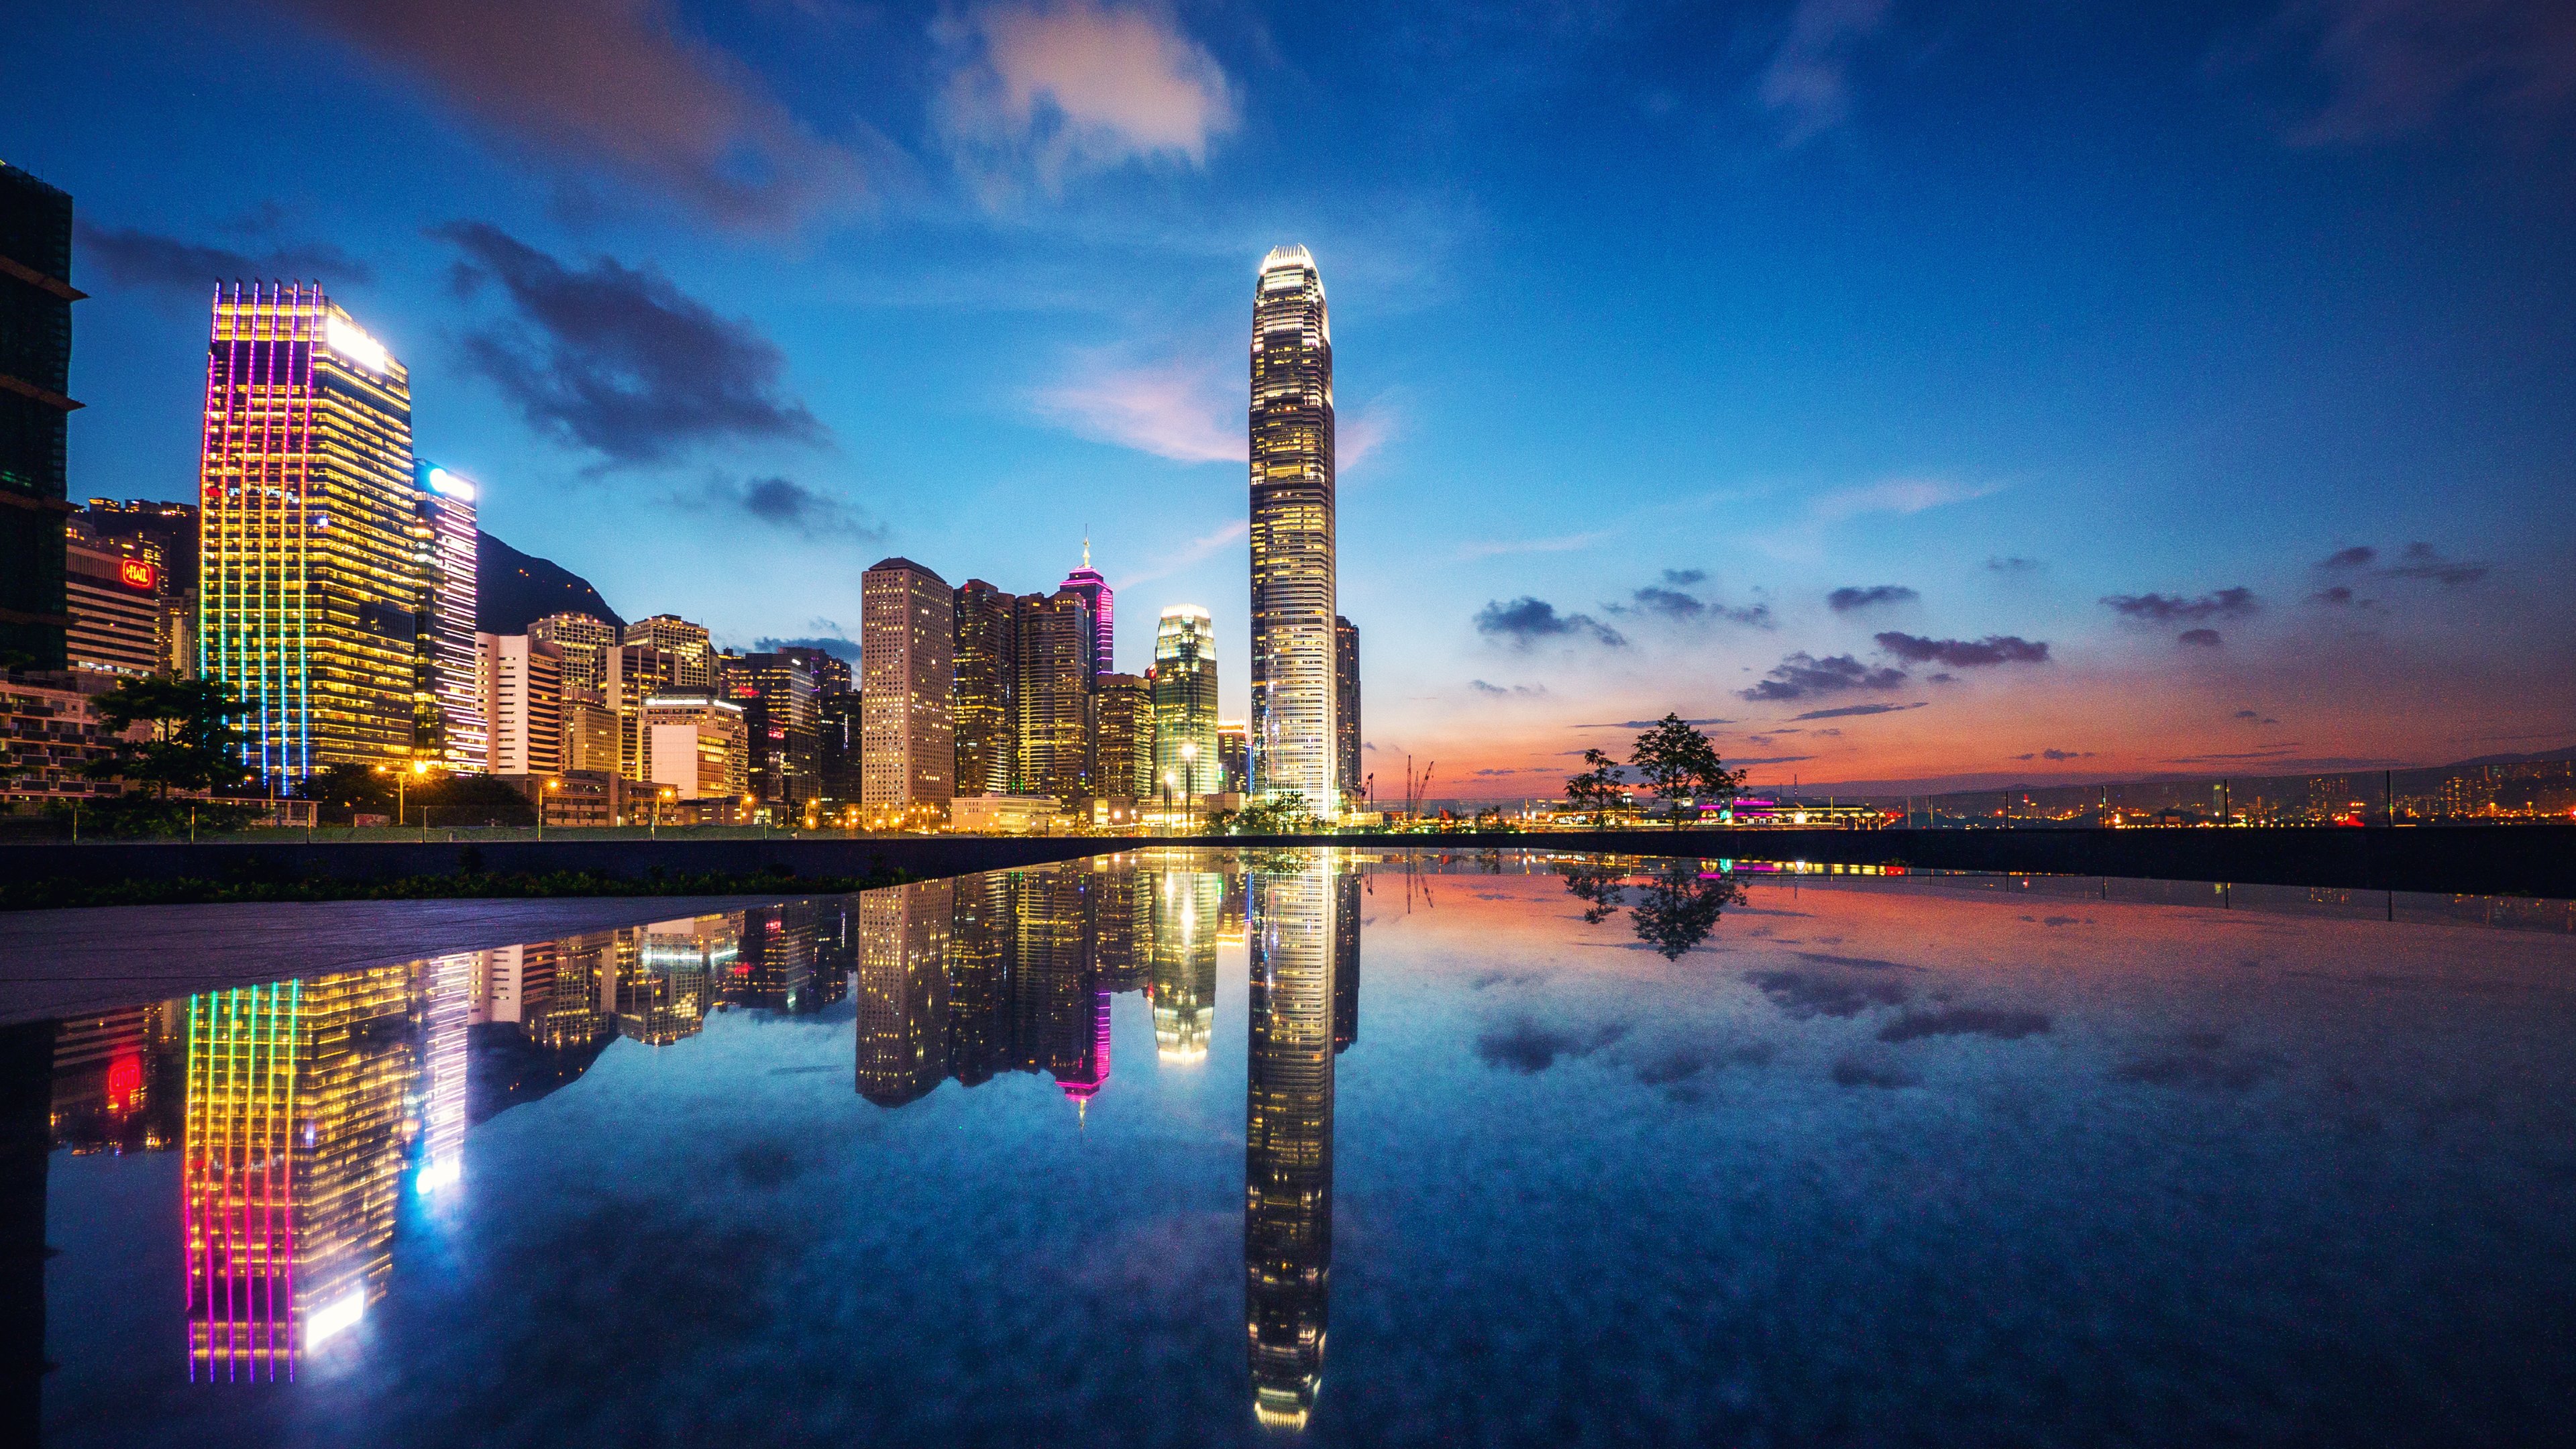 reflection, architecture, cityscape, hong kong, man made, cities, building, twilight UHD